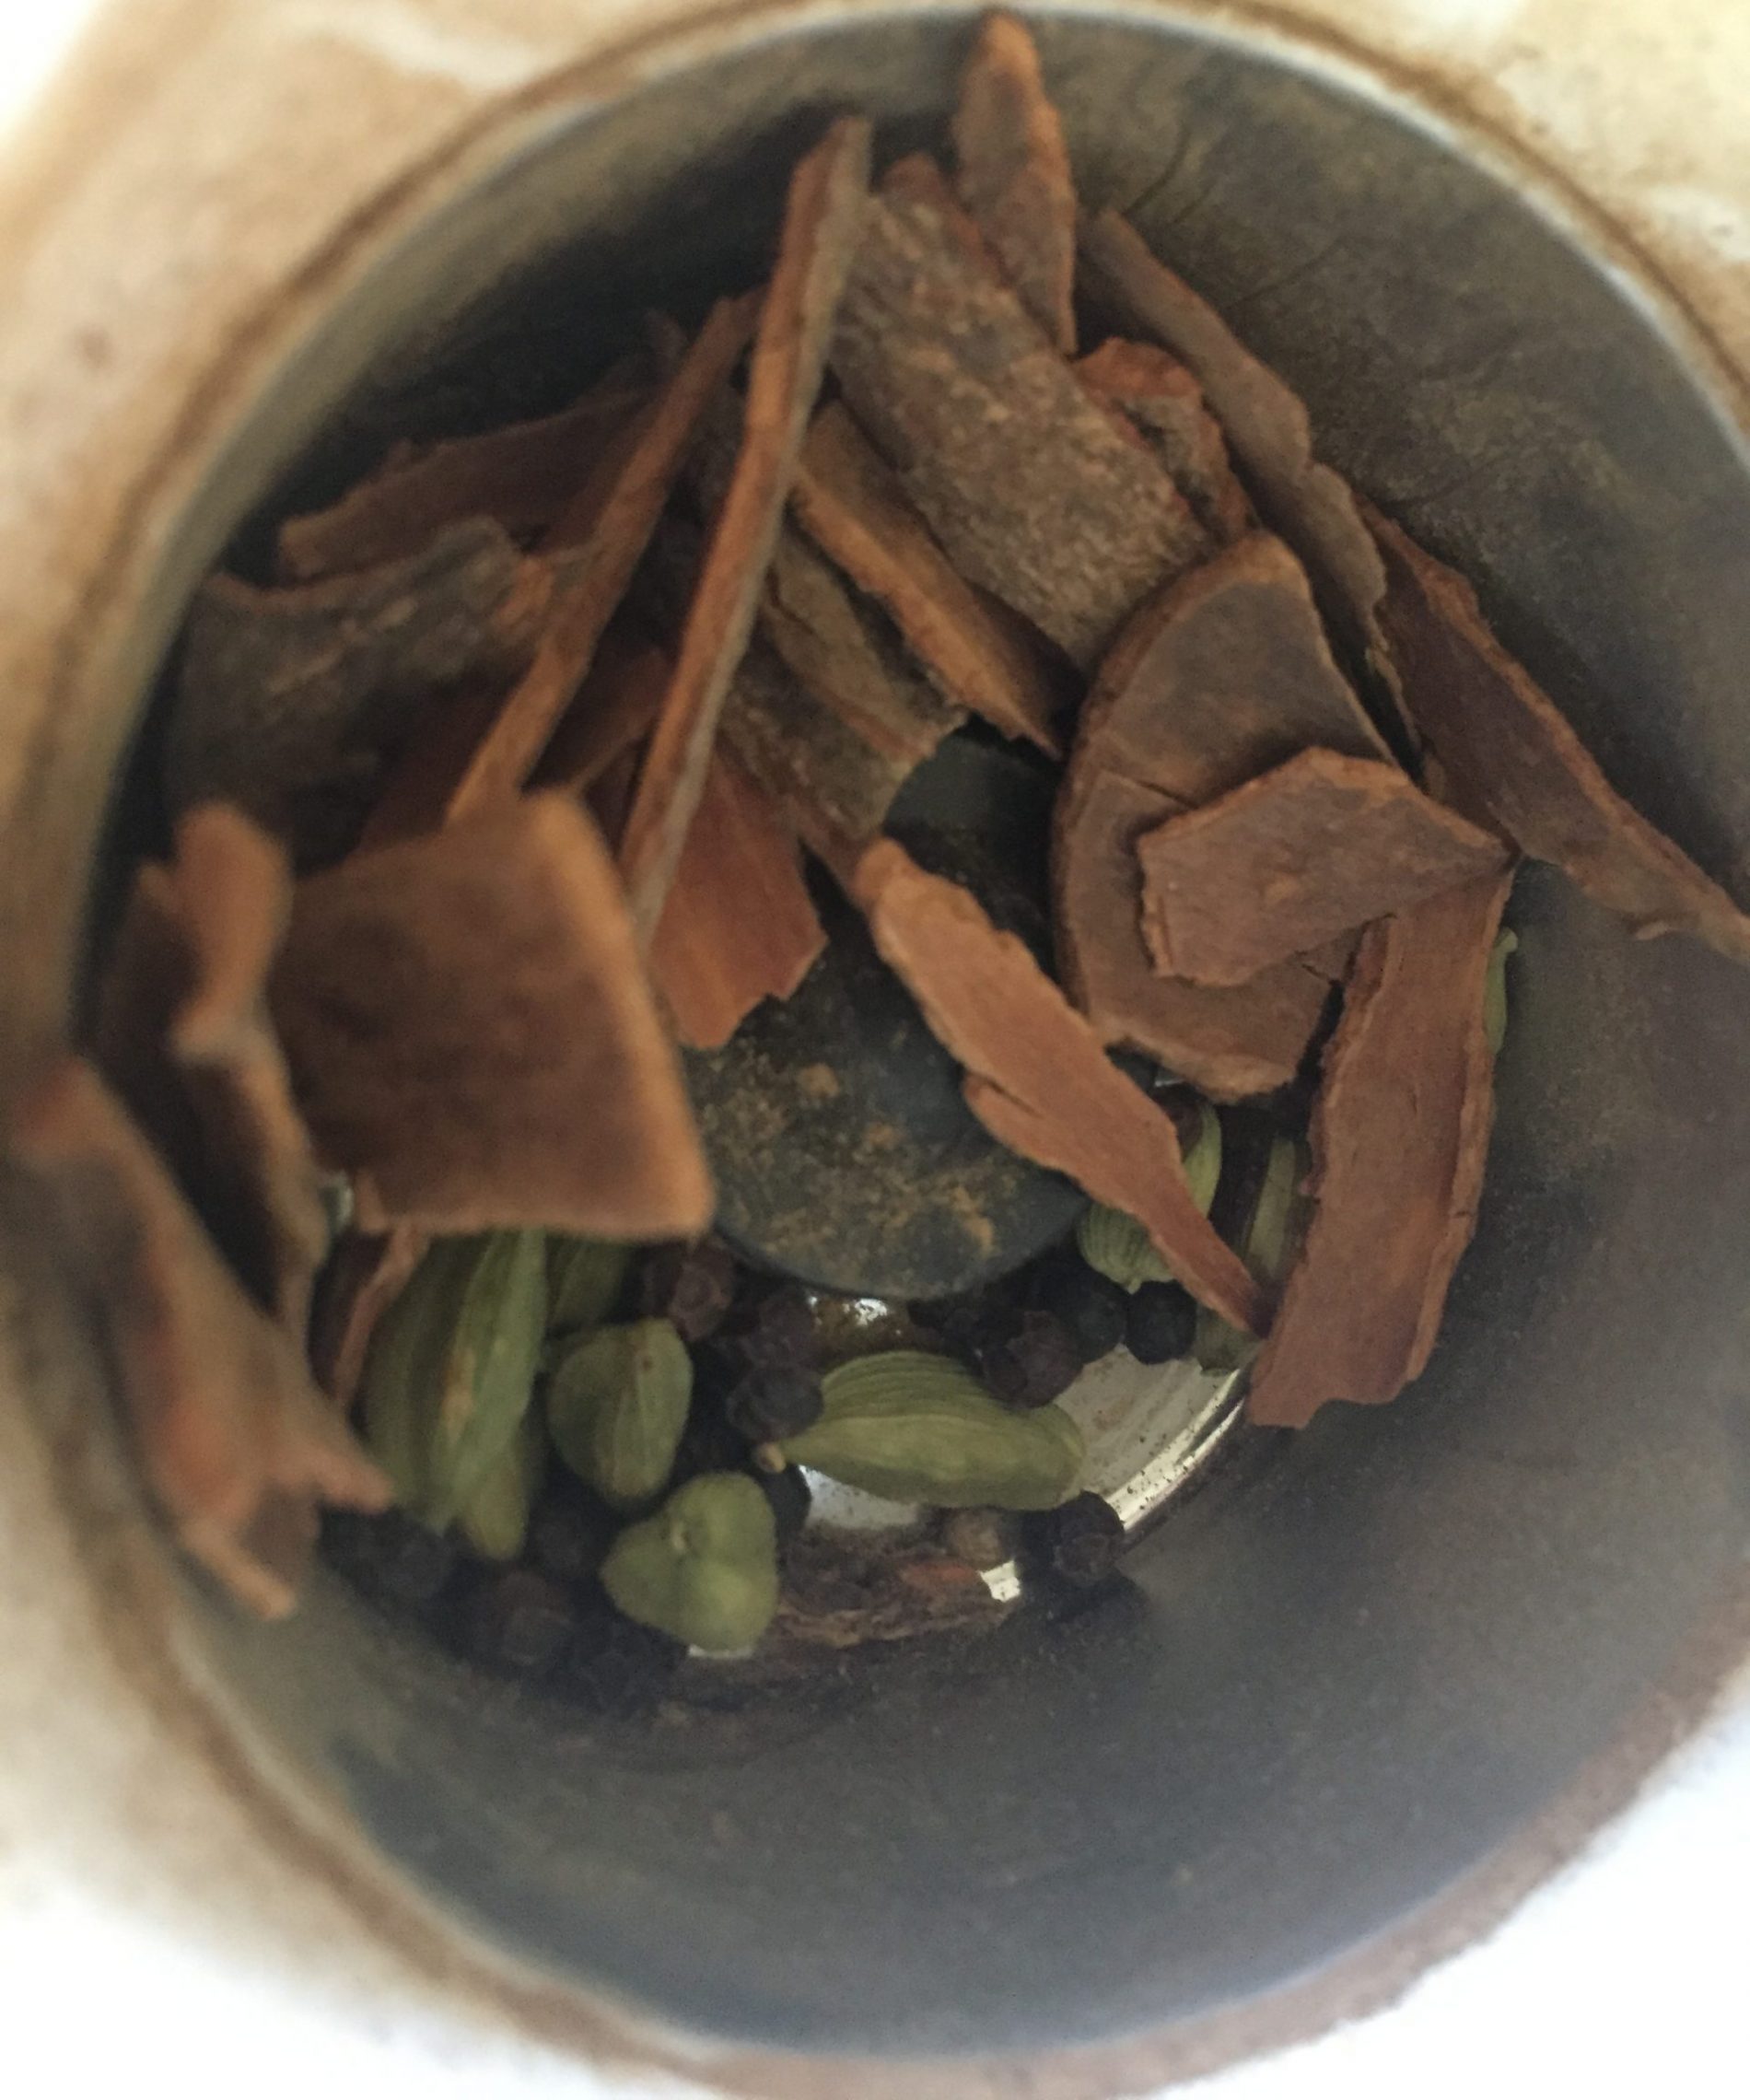 Whole chai spices in coffee grinder